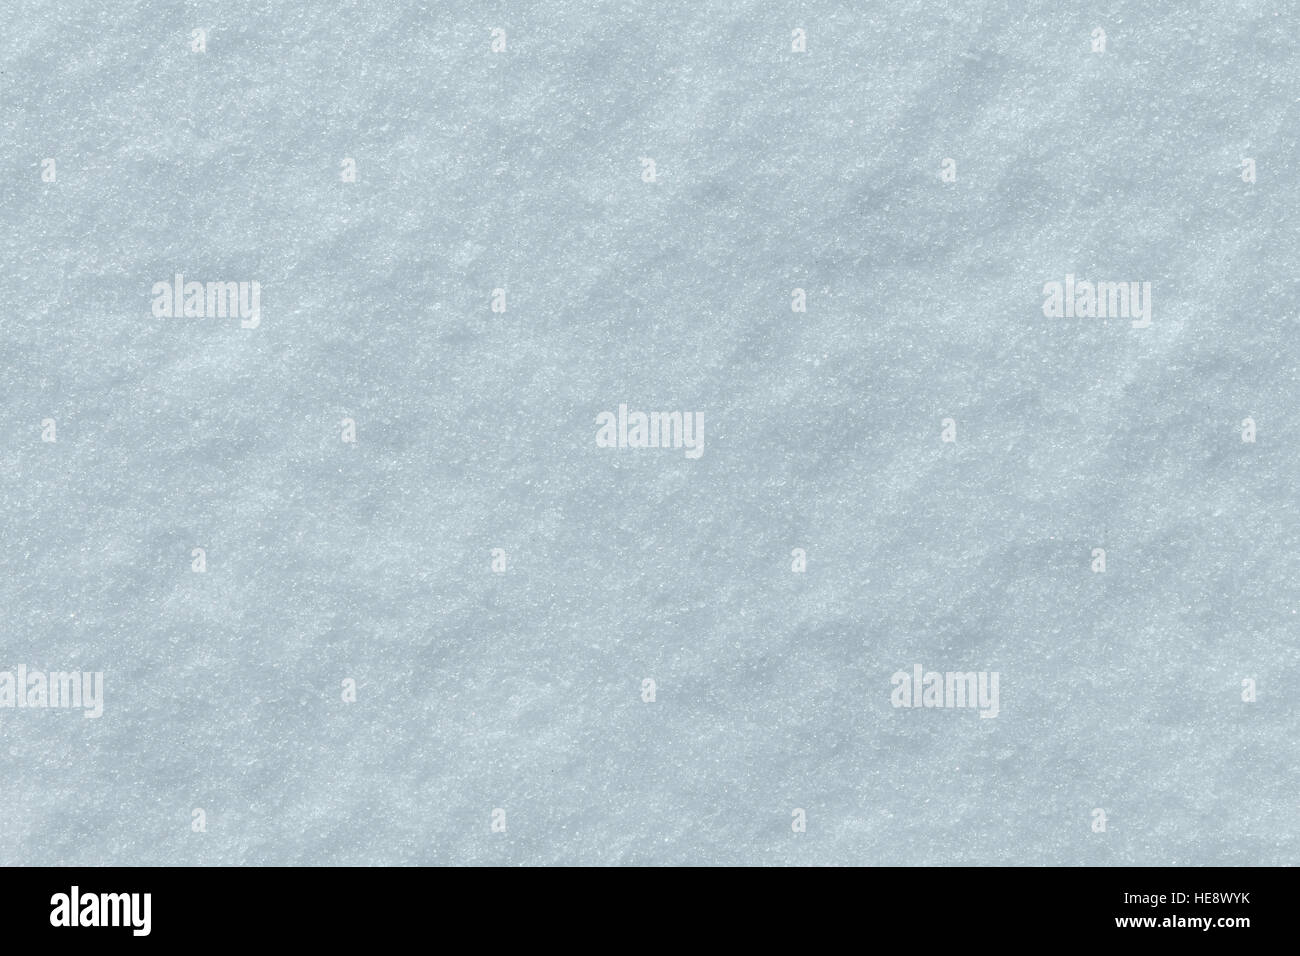 Snow texture background as a cold surface made of white winter snowflakes. Stock Photo